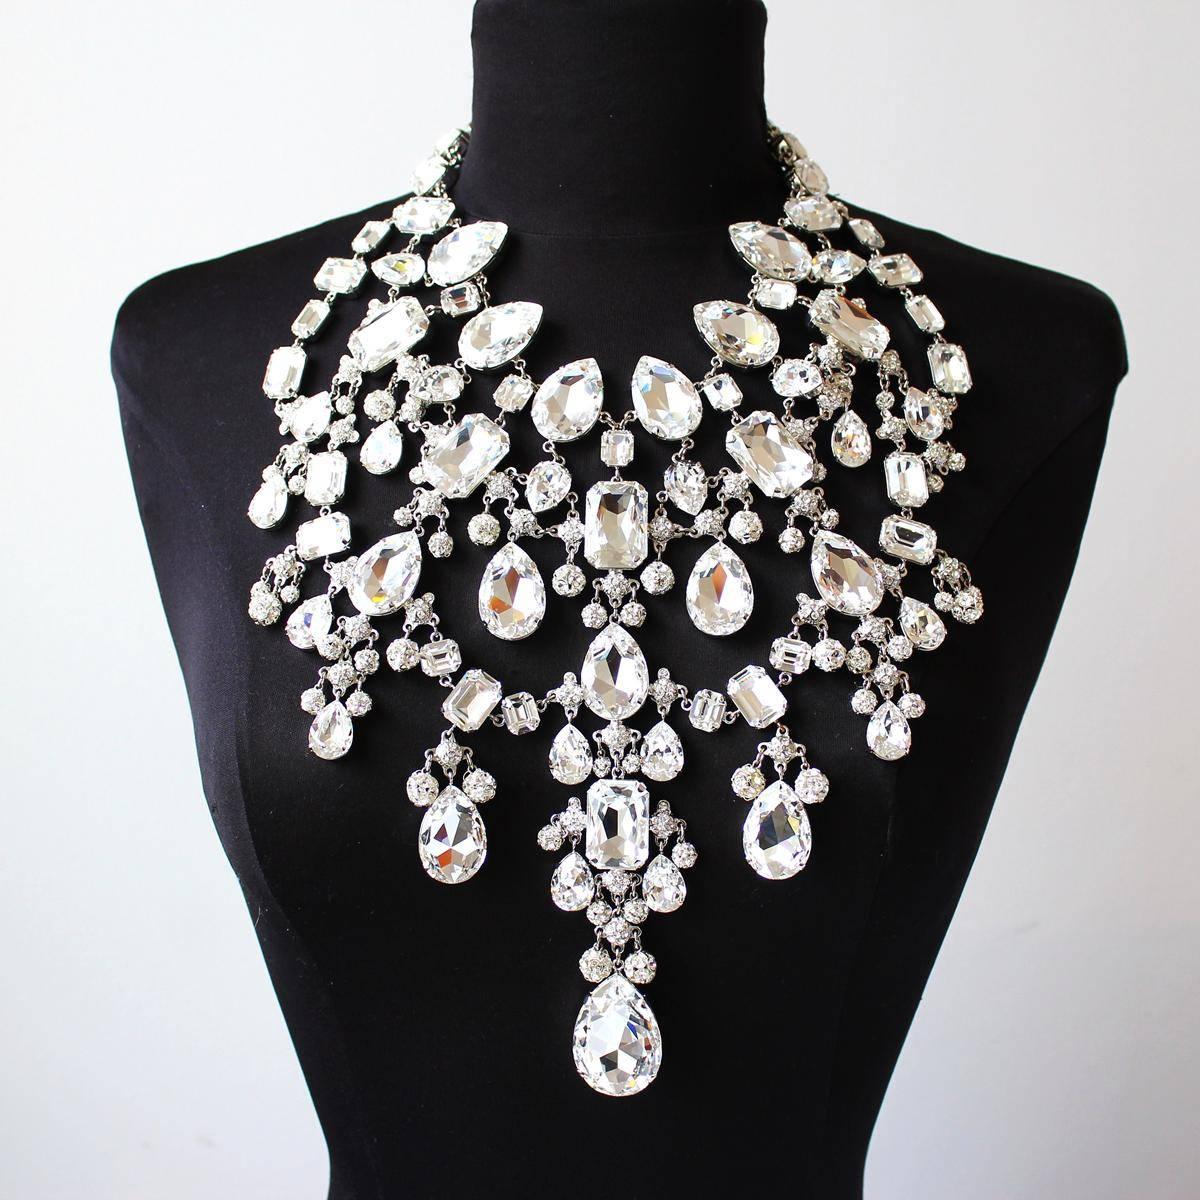 Fantastic masterpiece by Carlo Zini
One of theworld greatest bijoux designers
Large collier
Stunning ramage of class A Swarovski crystals
Mervellous creation made by three lines of drops and big pendants
100% Artisanal work
Worldwide express